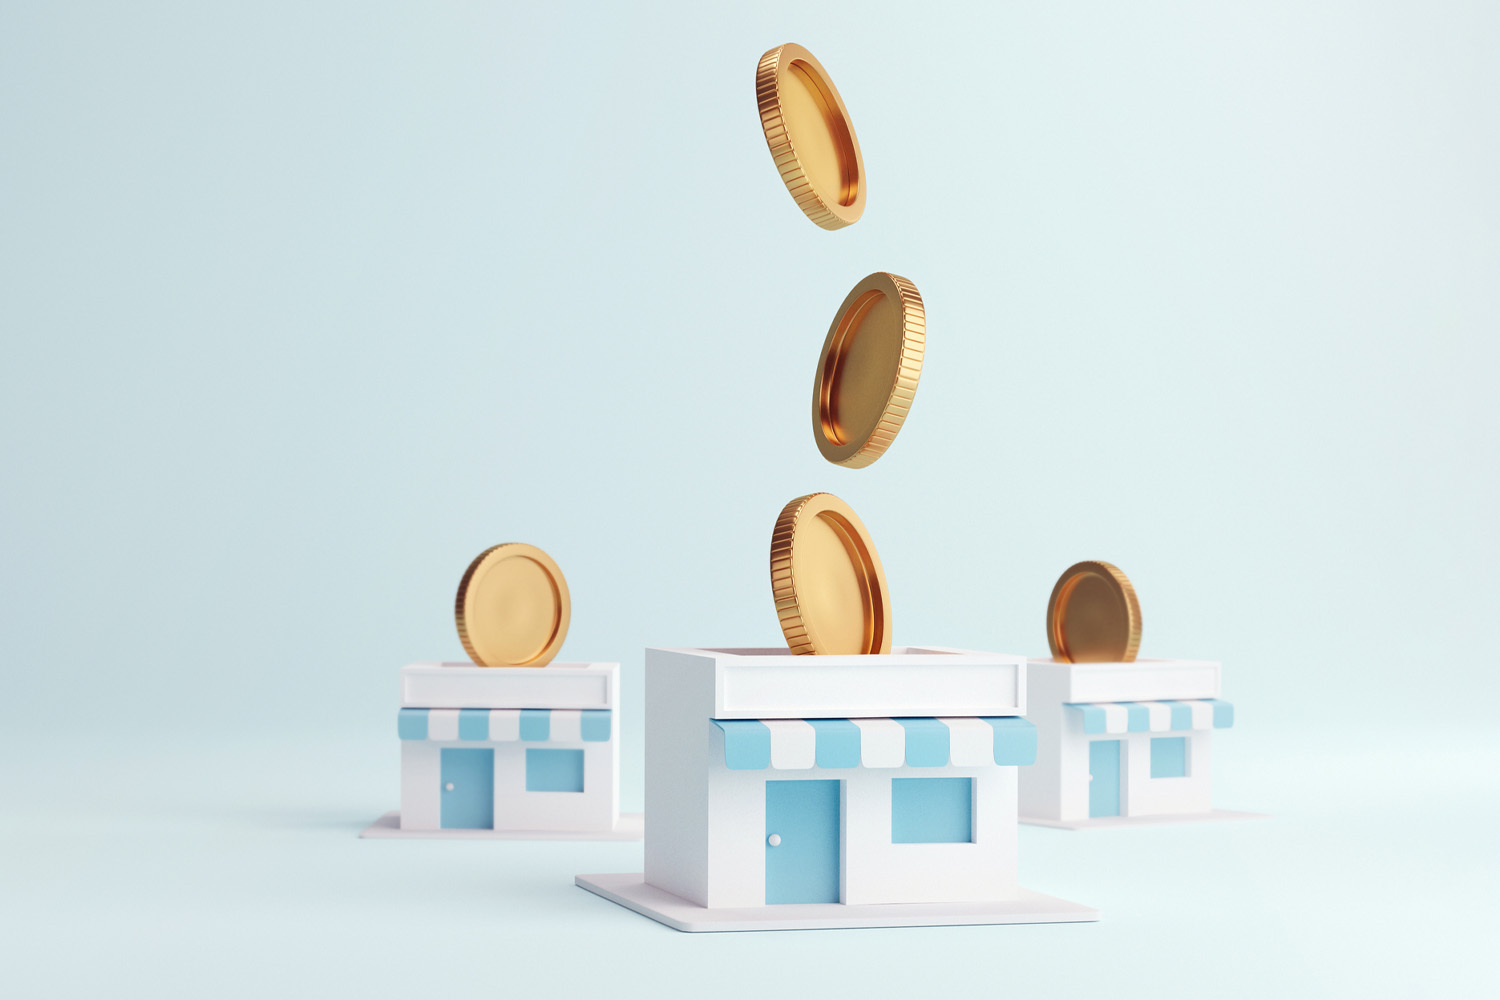 Small model houses with coins dropping into them